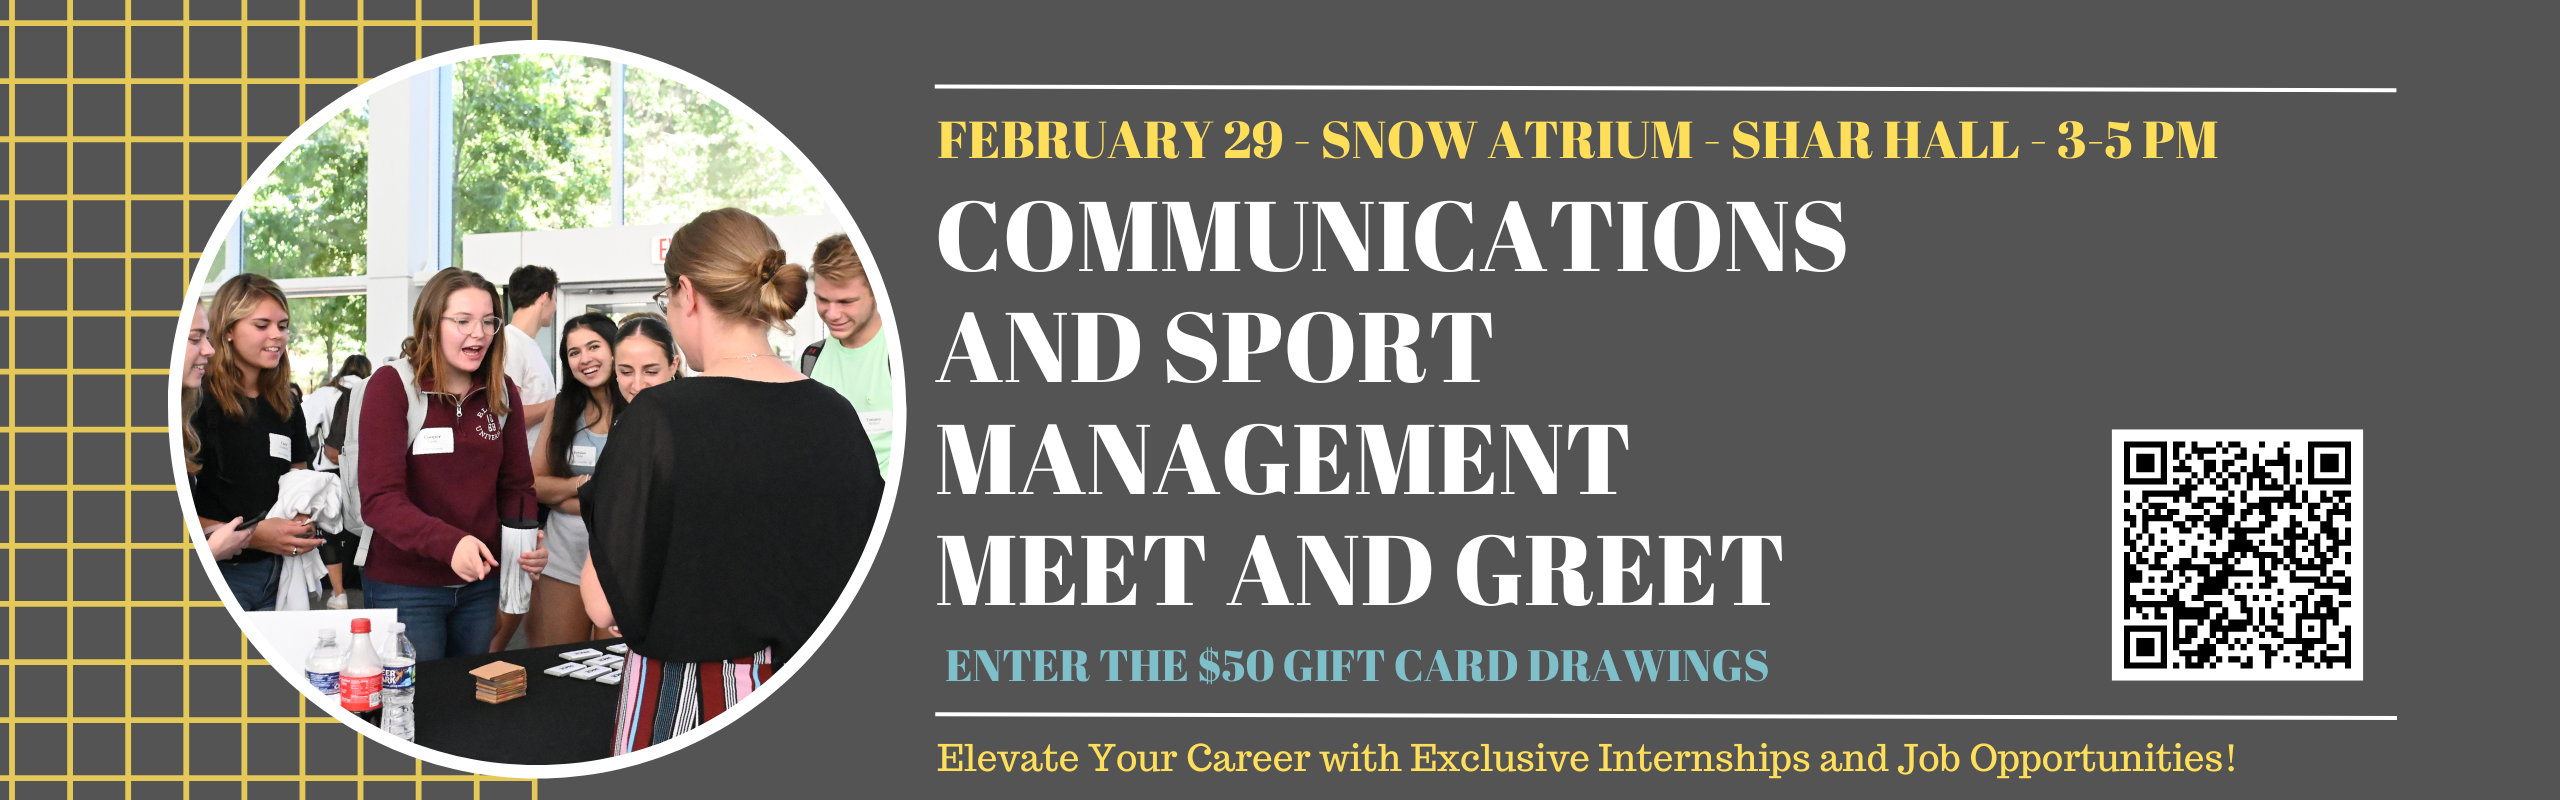 COM MEET AND GREET FEB 29 20 EMPLOYERS JOBS AND INTERNSHIPS REVIEW THE FULL LIST ON THE ELON JOB NETWORK SNOW ATRIUM FROM 3-5 PM